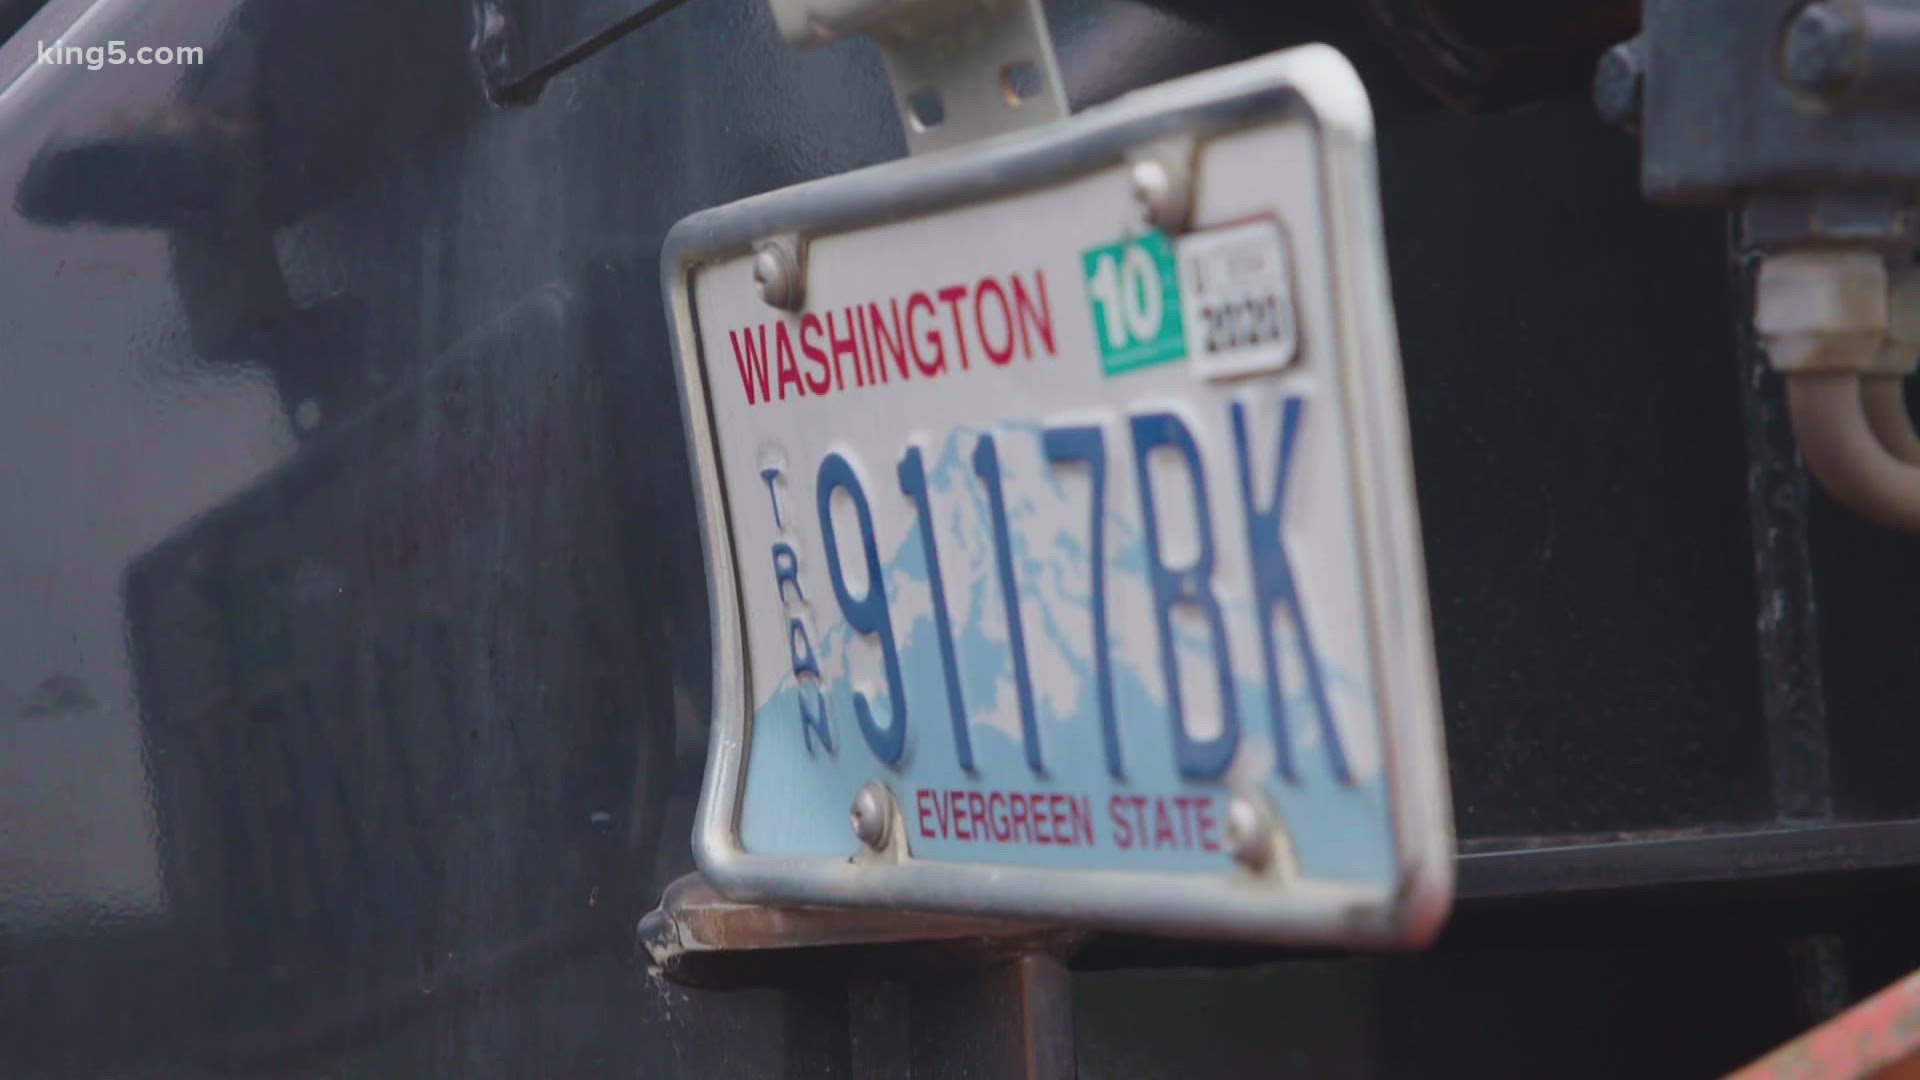 Criminals Use Washington License Plates To Conceal Cars Used In